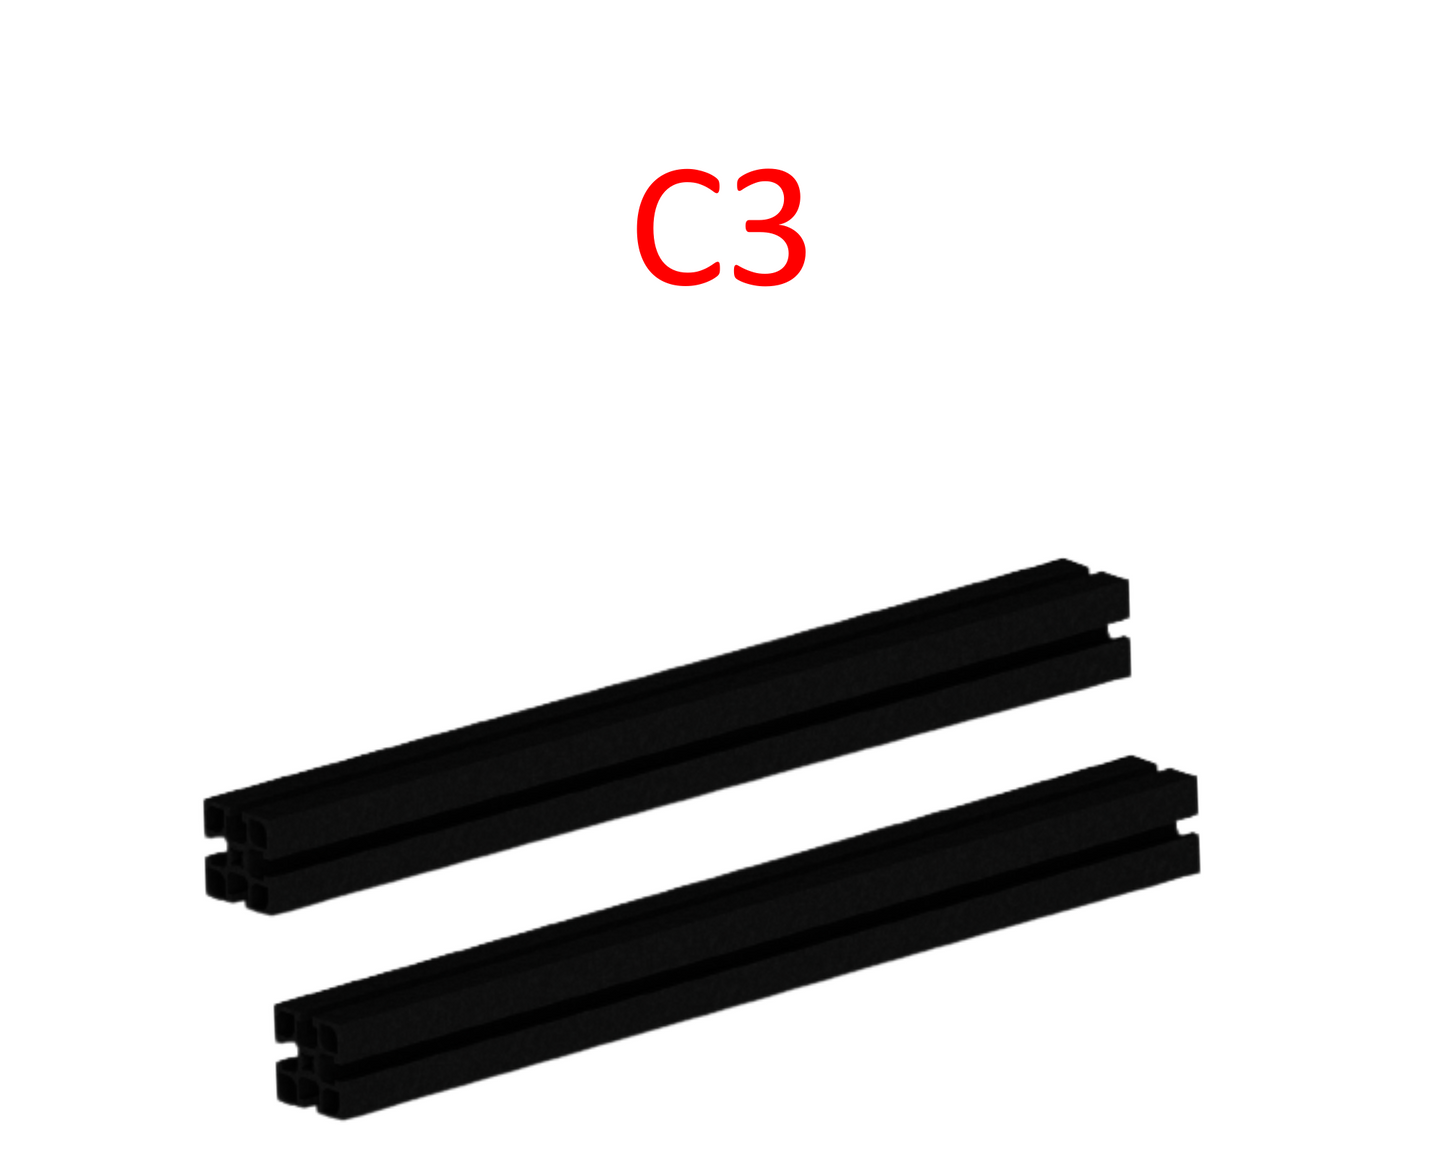 Frame reinforcement covers kit C3 - NWS